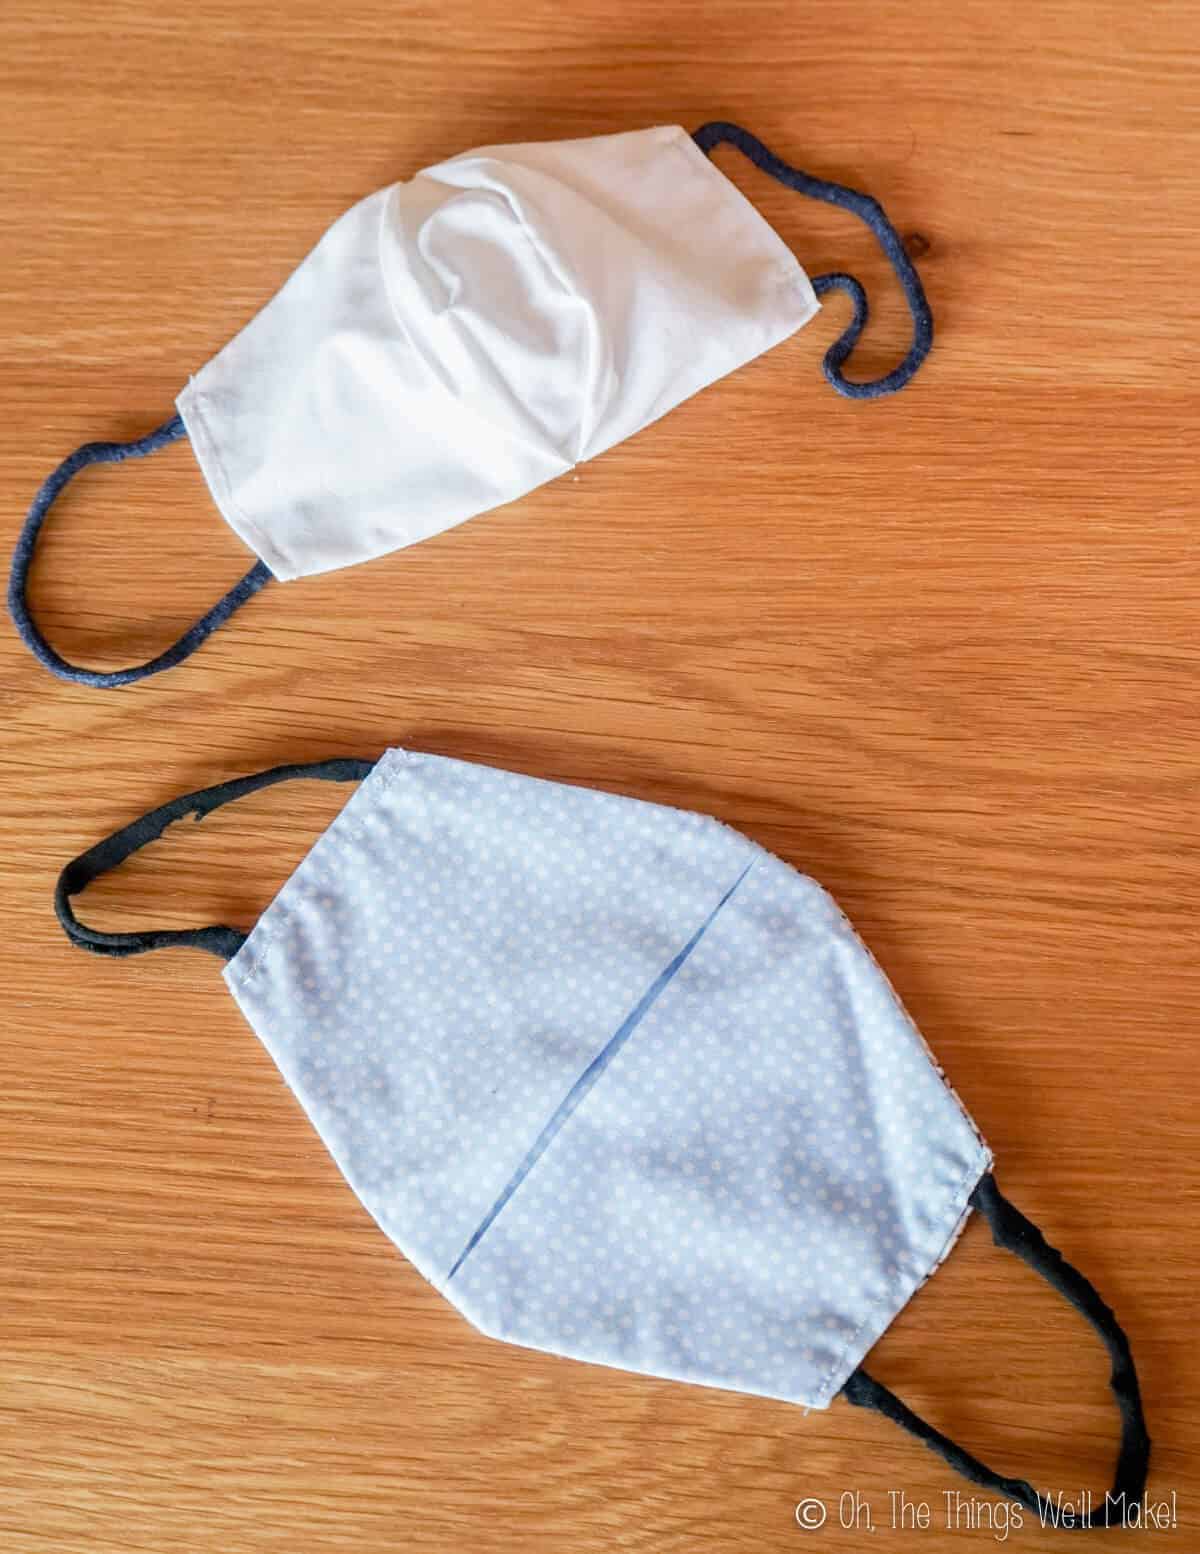 Overhead view of 2 face masks, one closed and one open.